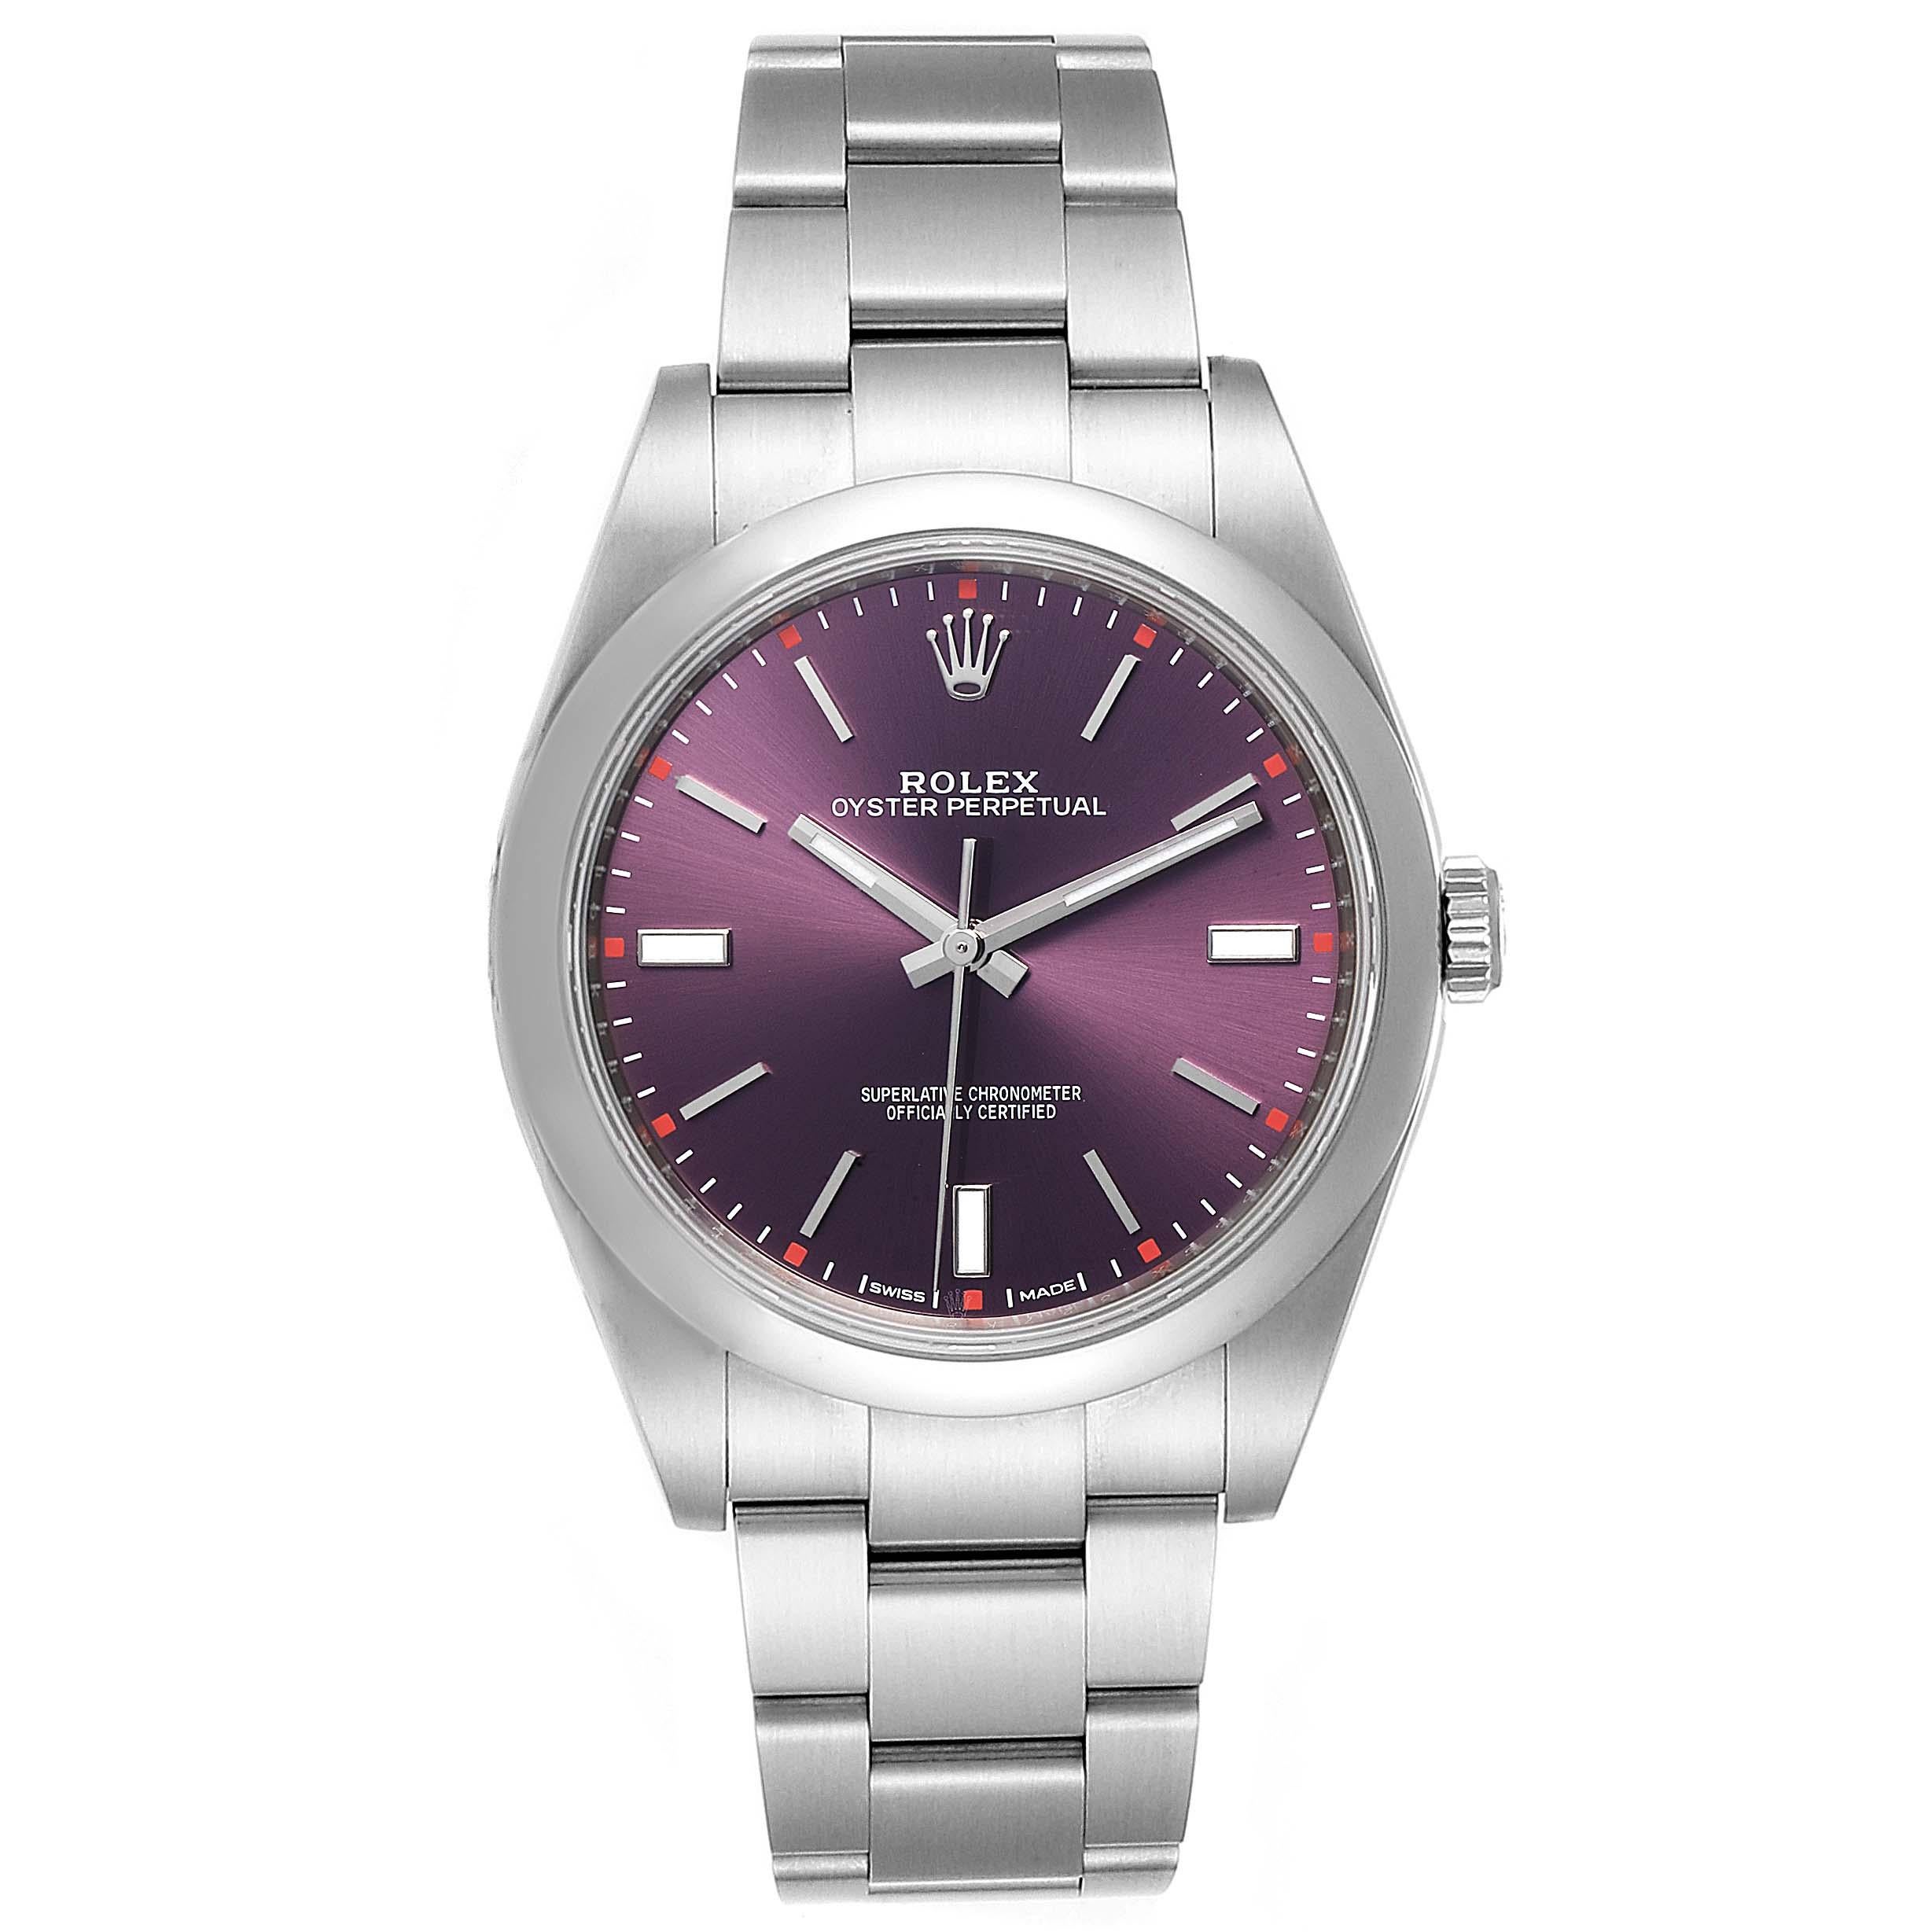 Rolex Oyster Perpetual Red Grape Dial Steel Mens Watch 114300 Box Card. Officially certified chronometer self-winding movement. Stainless steel case 36.0 mm in diameter. Rolex logo on a crown. Stainless steel smooth domed bezel. Scratch resistant